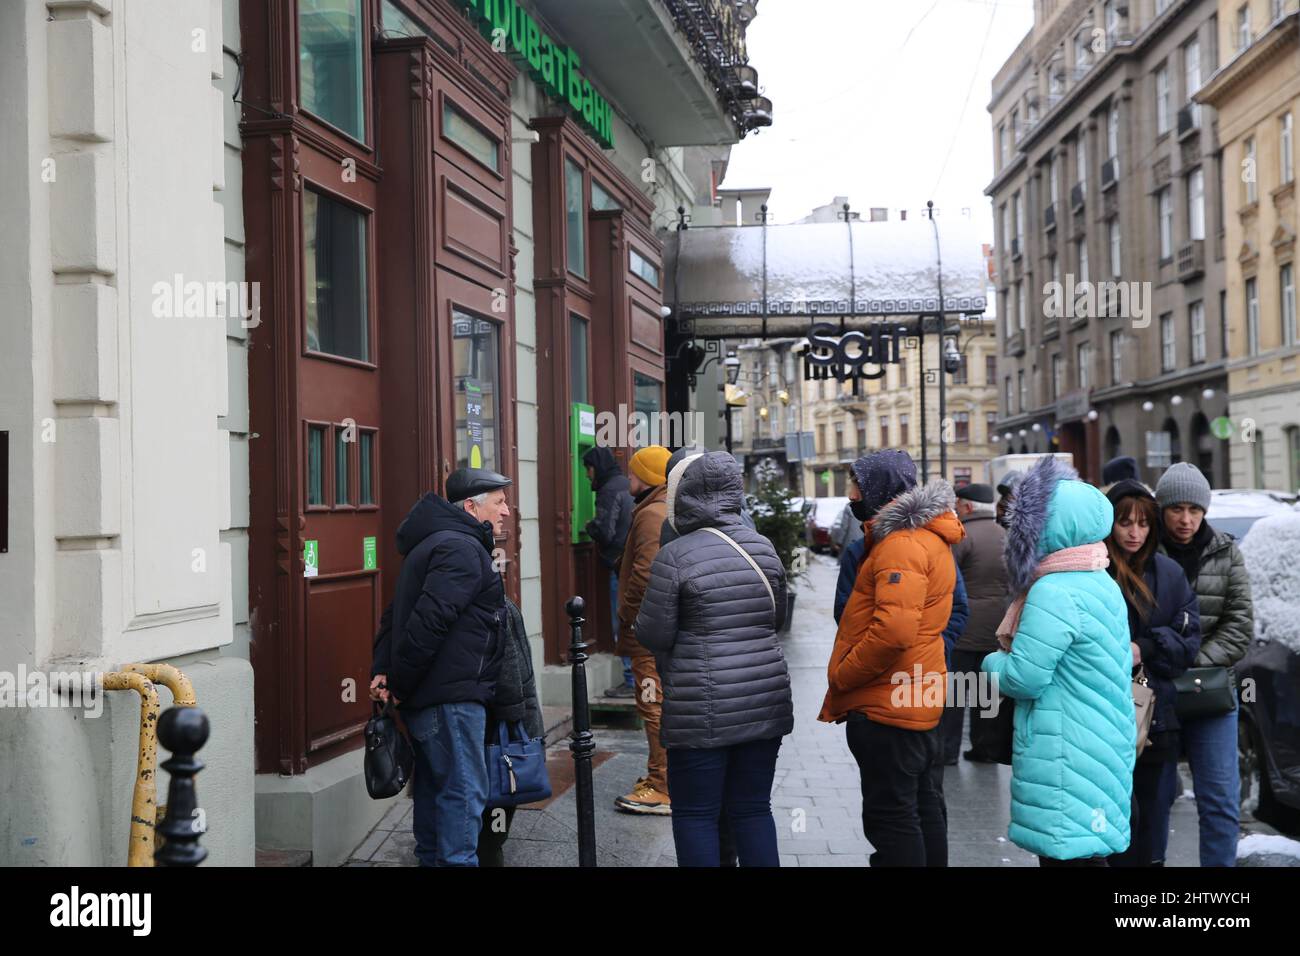 Moscow/Kiev. 2nd Mar, 2022. People queue up at an ATM counter to withdraw money in Lviv, Ukraine, Feb. 28, 2022. Credit: Chen Wenxian/Xinhua/Alamy Live News Stock Photo